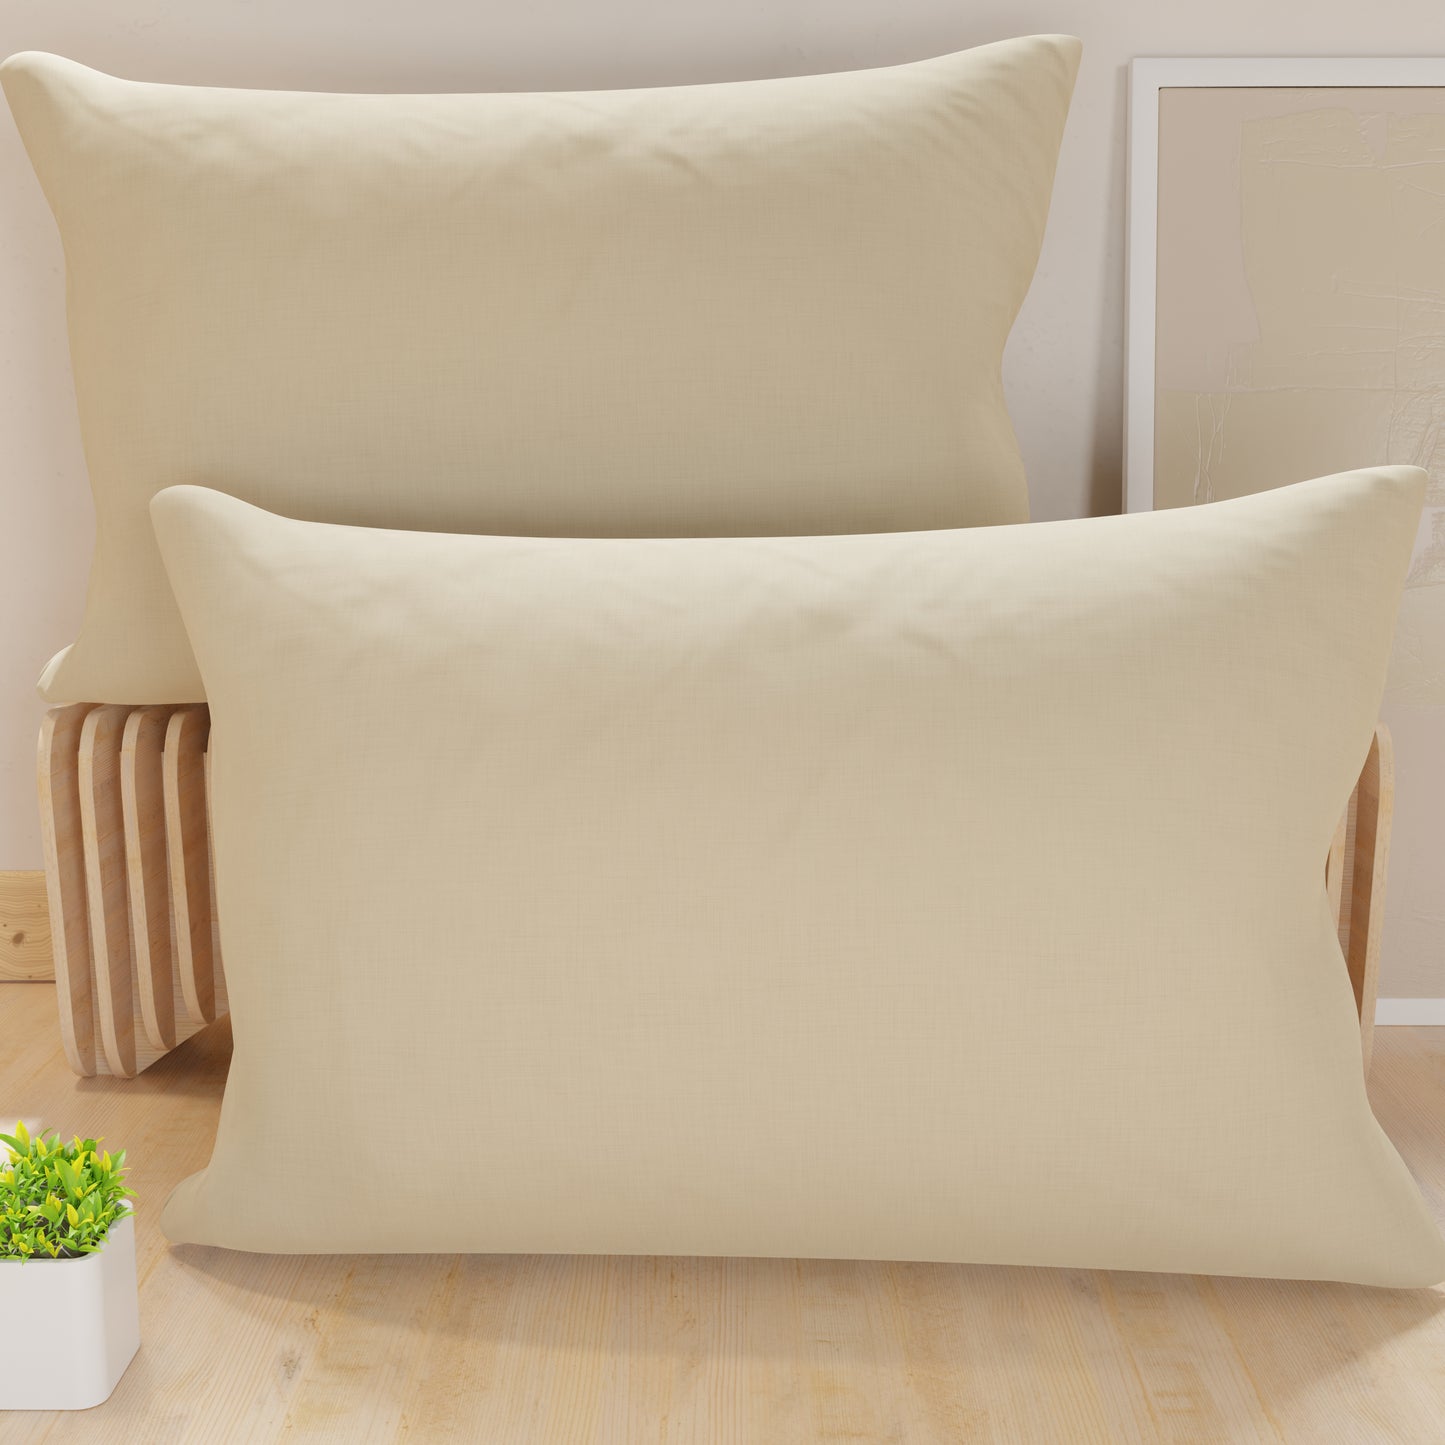 Pillowcases, Pair of Pillowcases, Pillow Covers, 100% Hypoallergenic Microfibre, Taupe